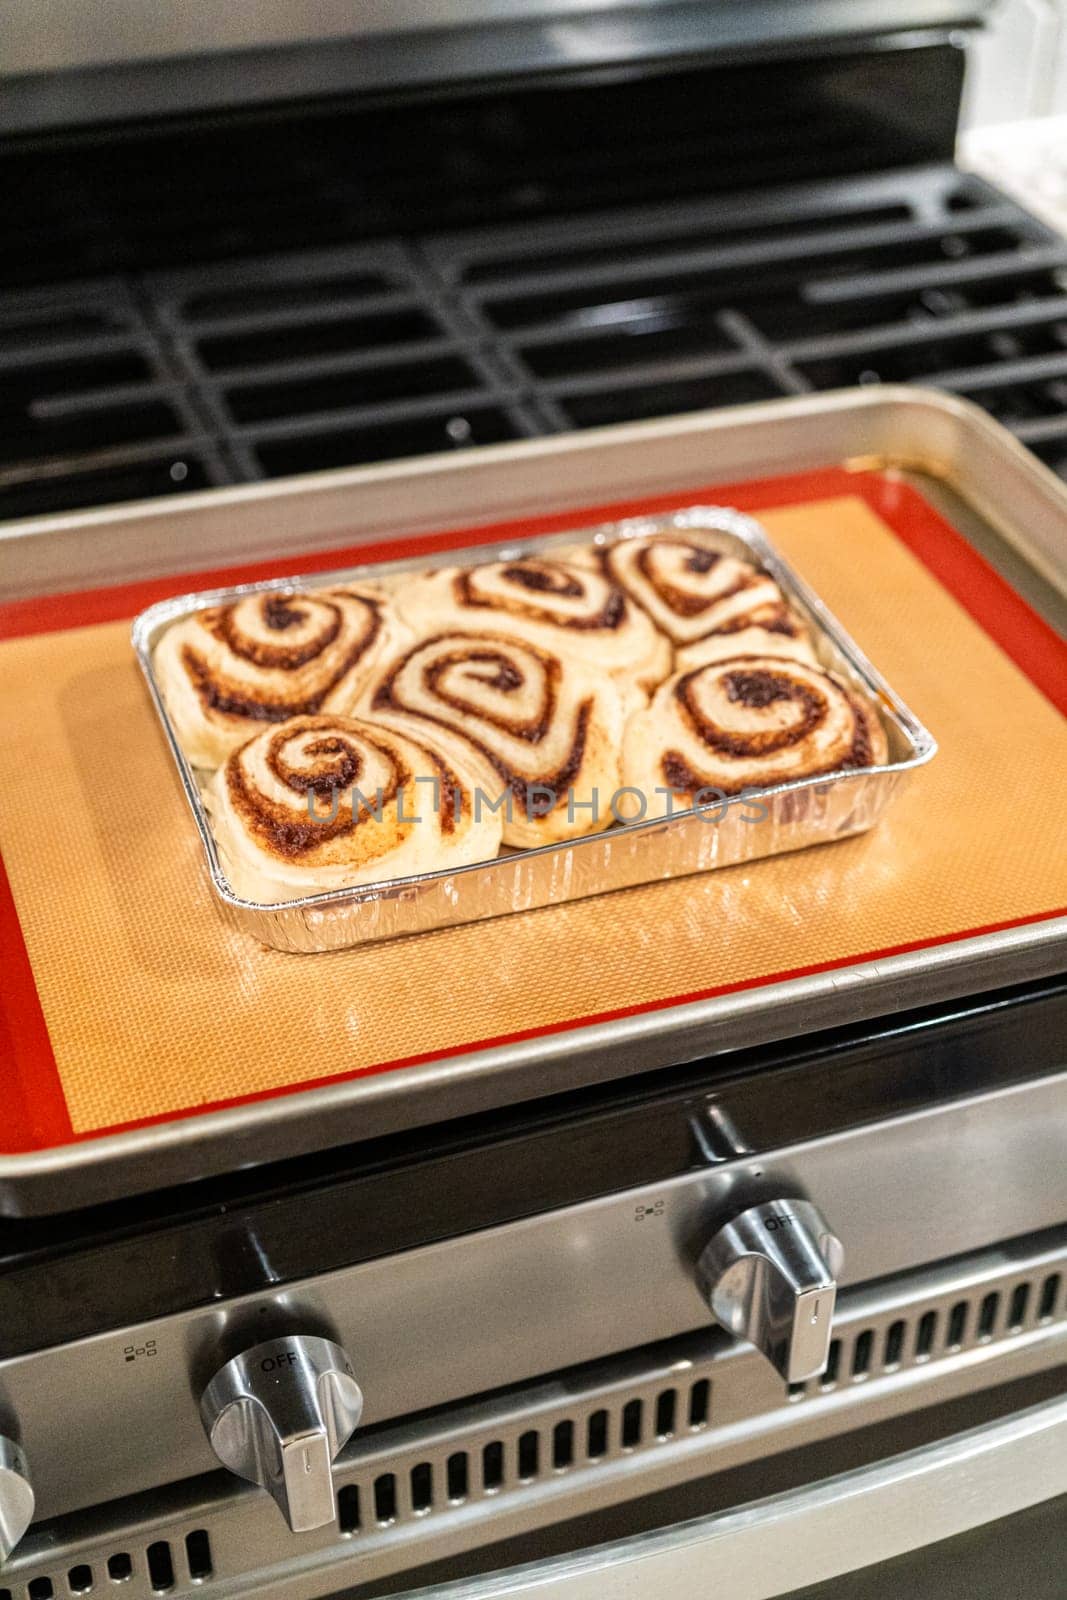 Freshly Baked Cinnamon Rolls Cooling on Stove Top by arinahabich